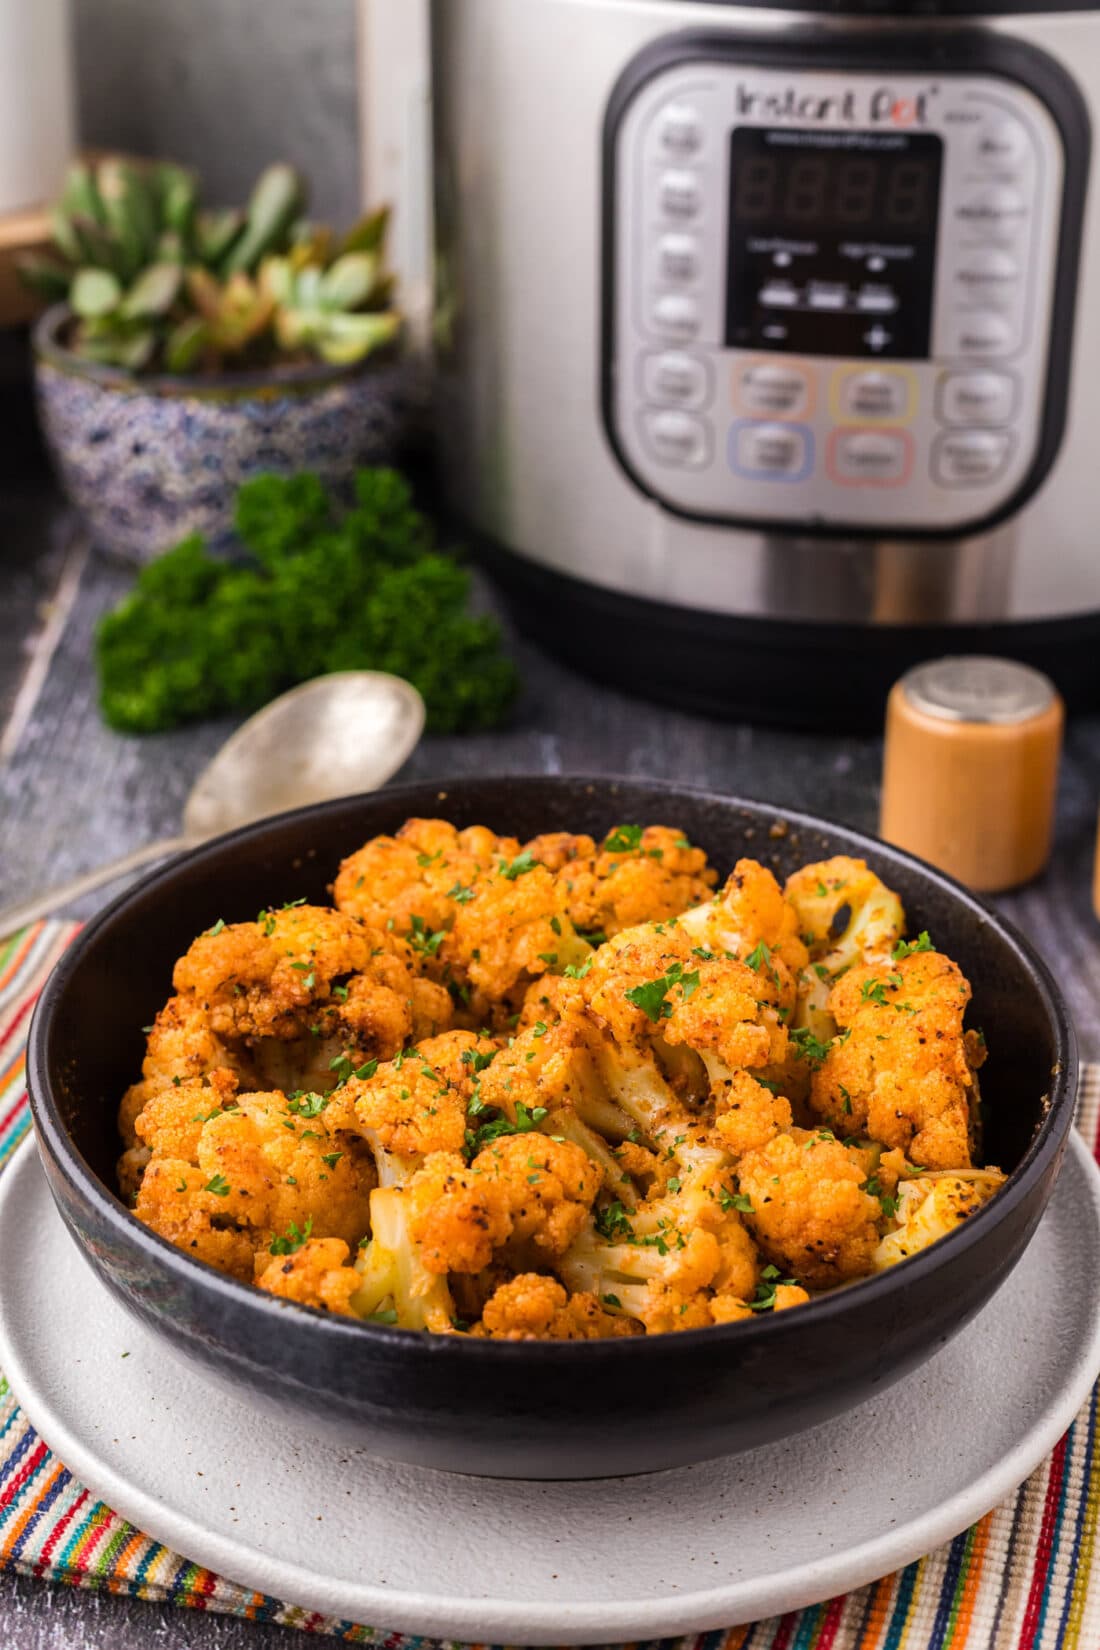 Bowl of Instant Pot Cauliflower with an Instant Pot in the background